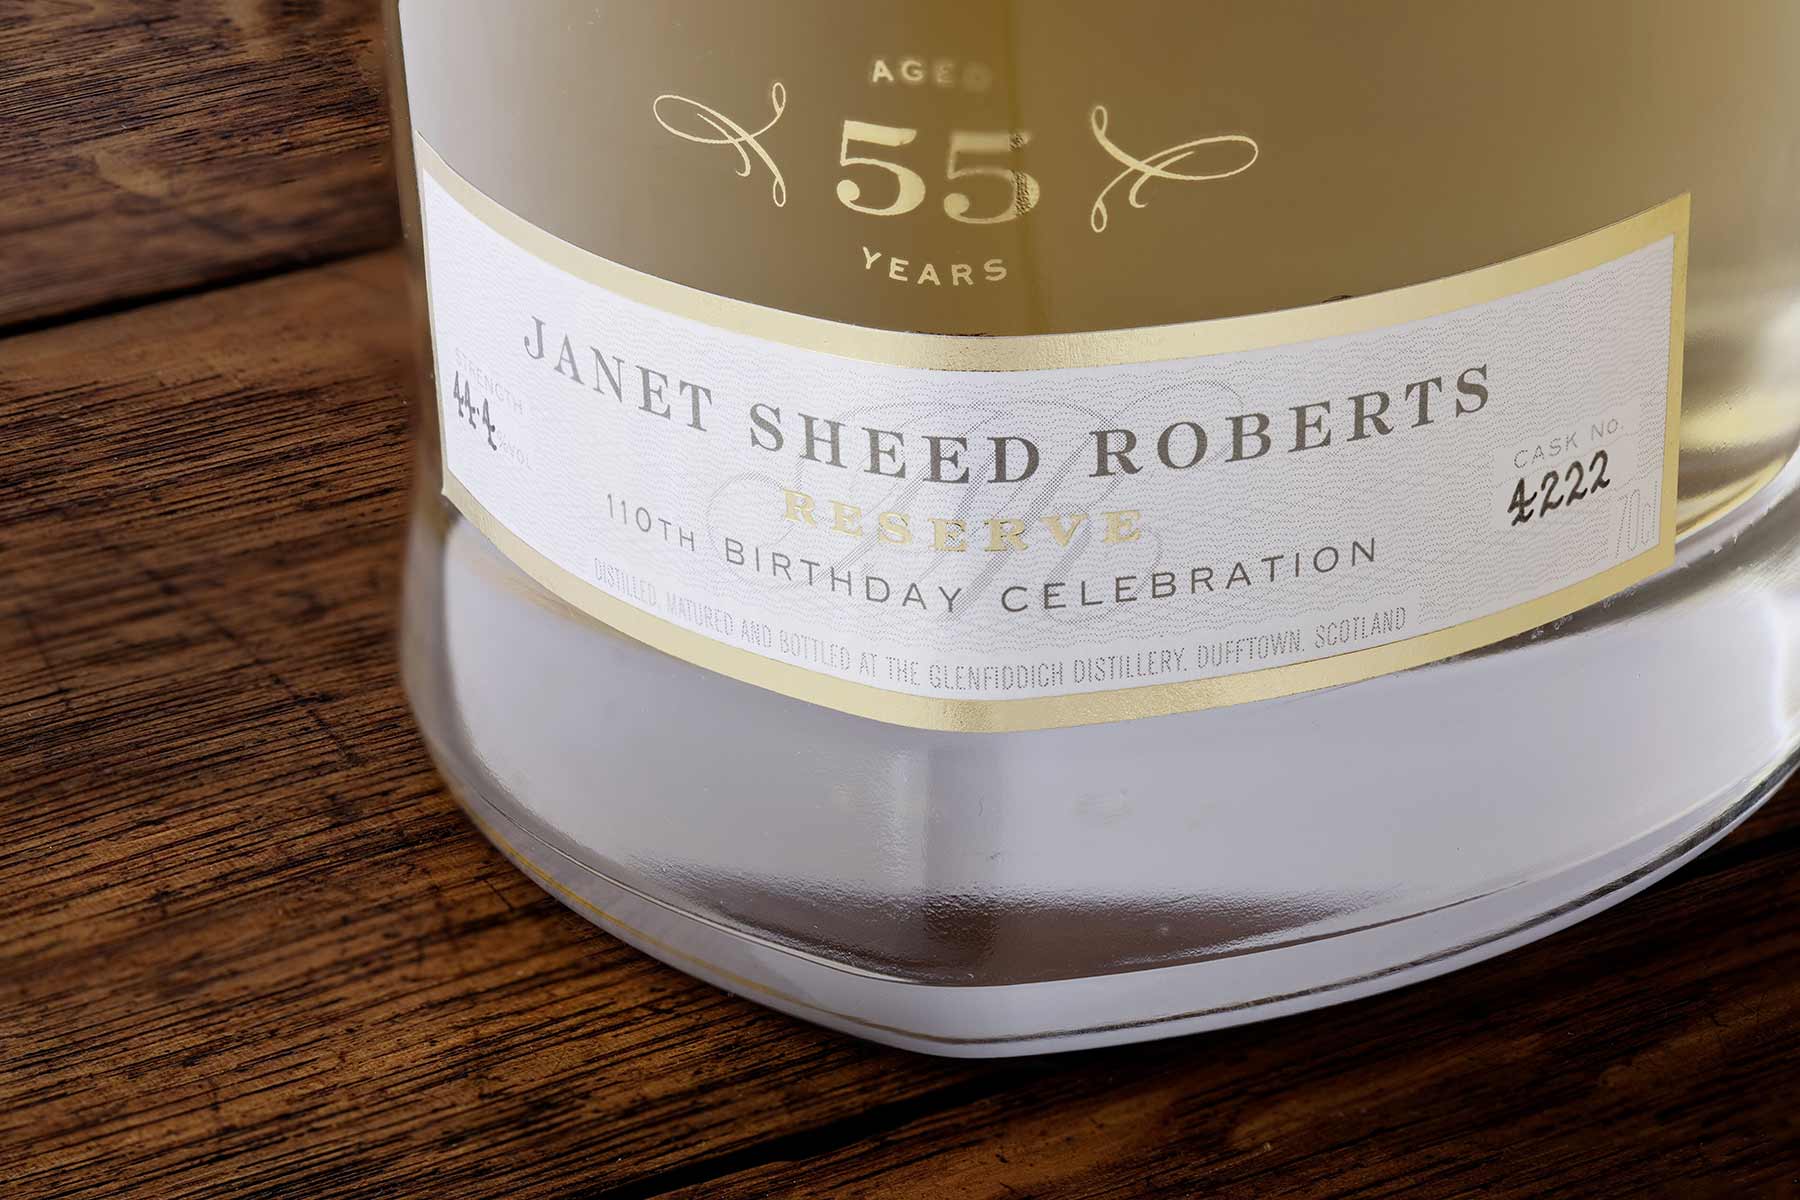 Glenfiddich 55 year old JANET SHEED ROBERTS RESERVE Bottle on wood table